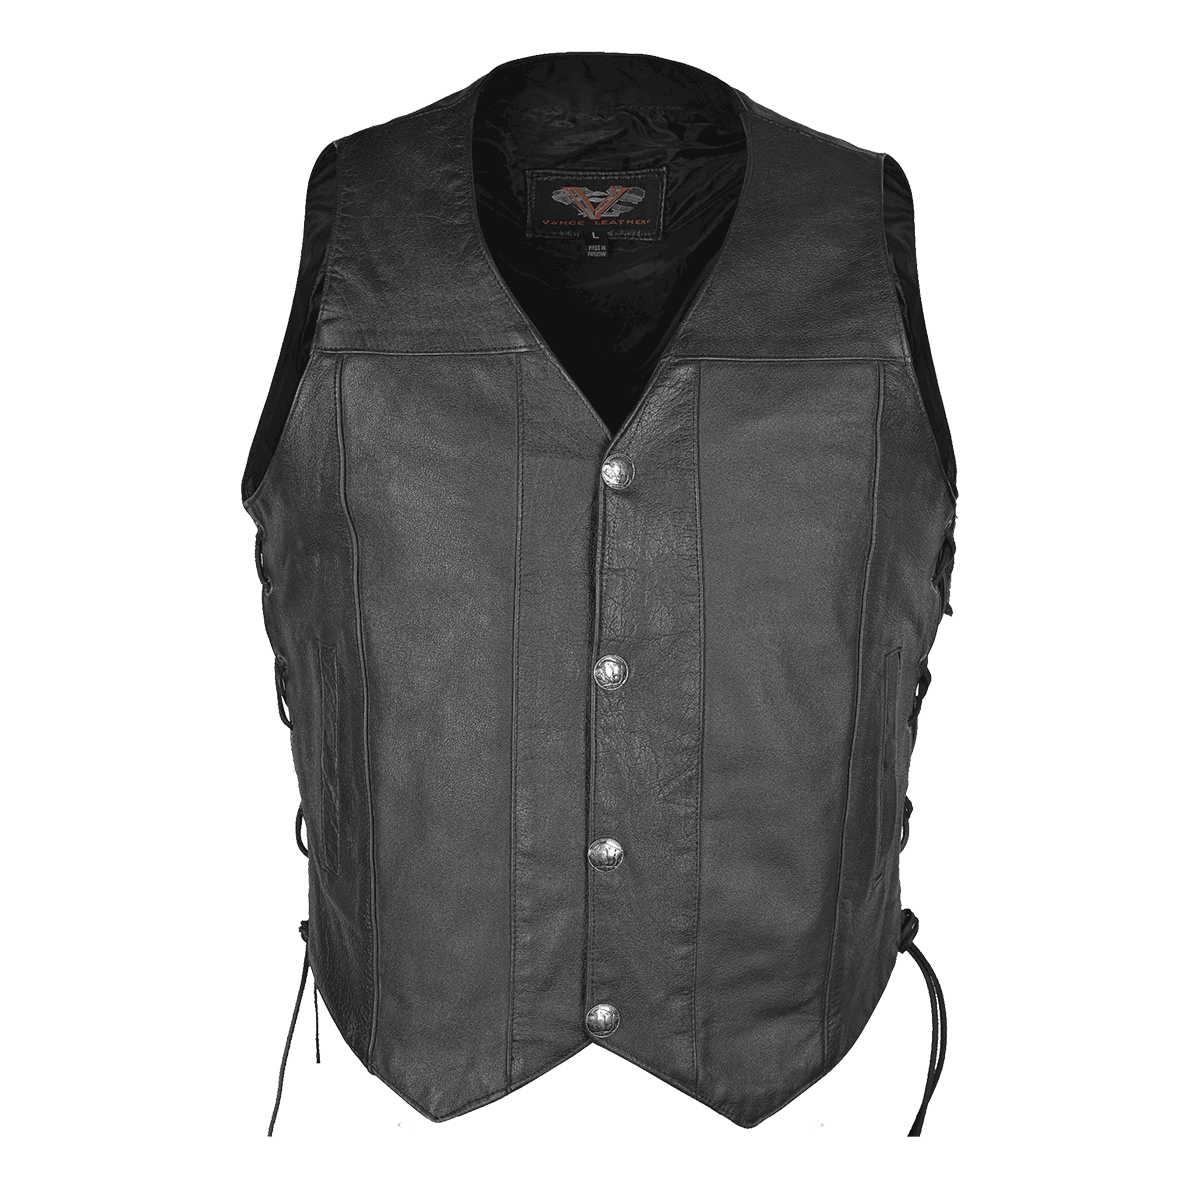 VL907 Vance Leather Premium Cowhide Vest with Buffalo Nickel Snaps and Gun Pocket